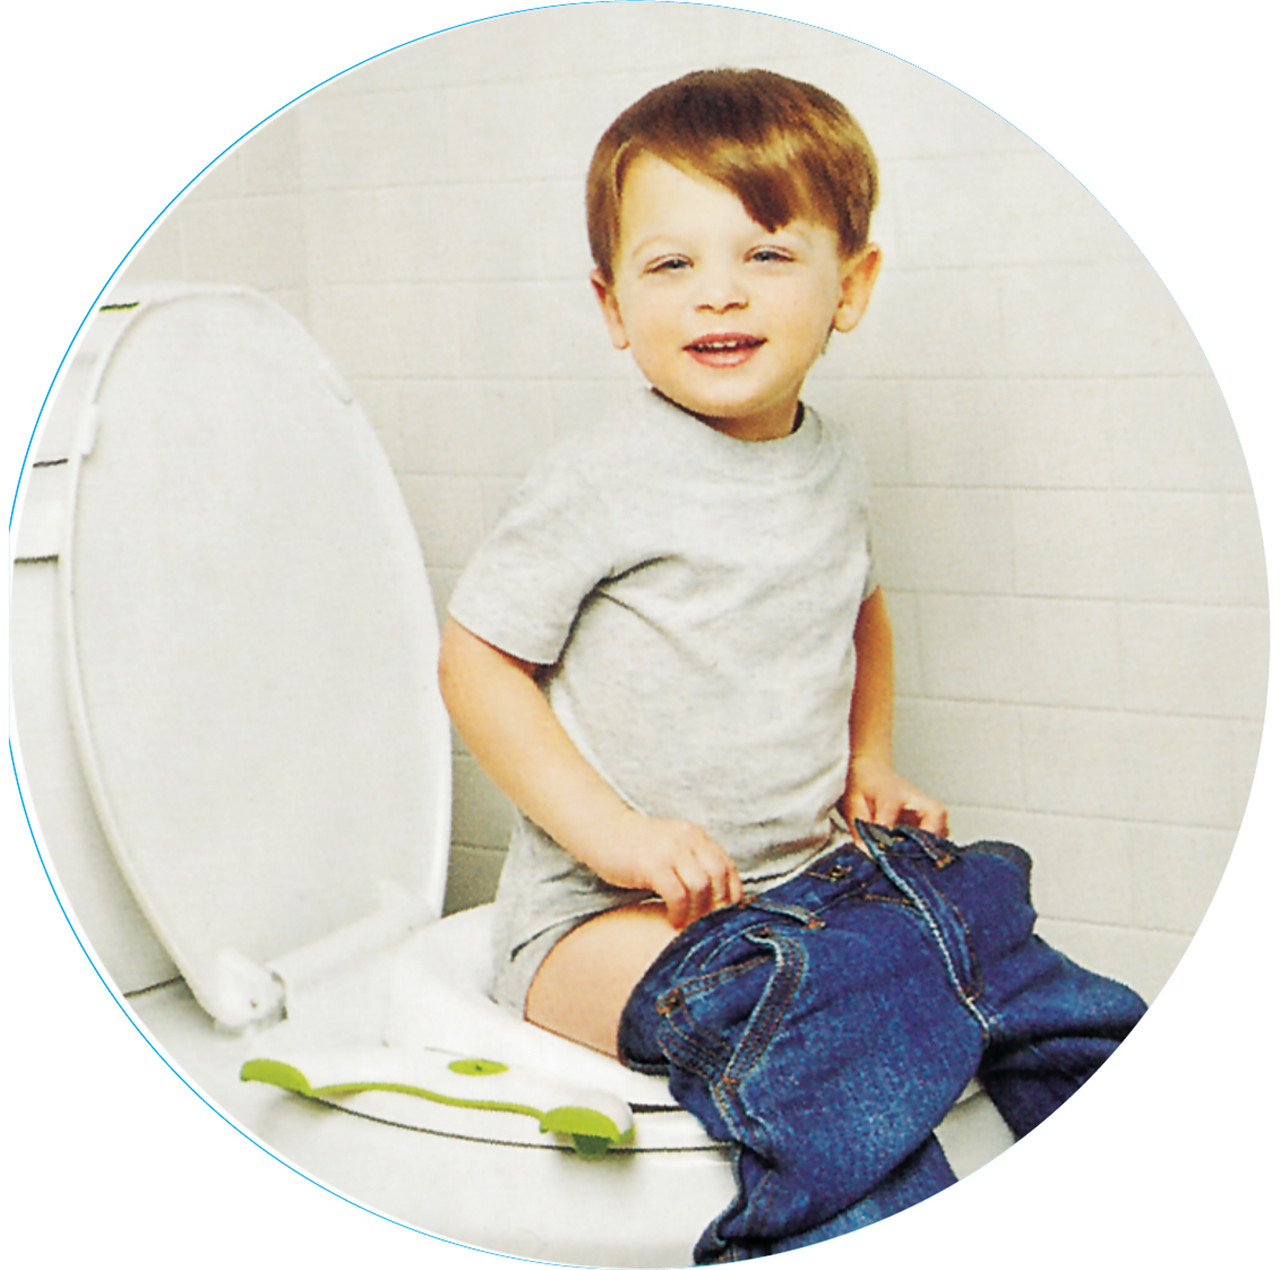 Baby sit on the potty in any bathroom